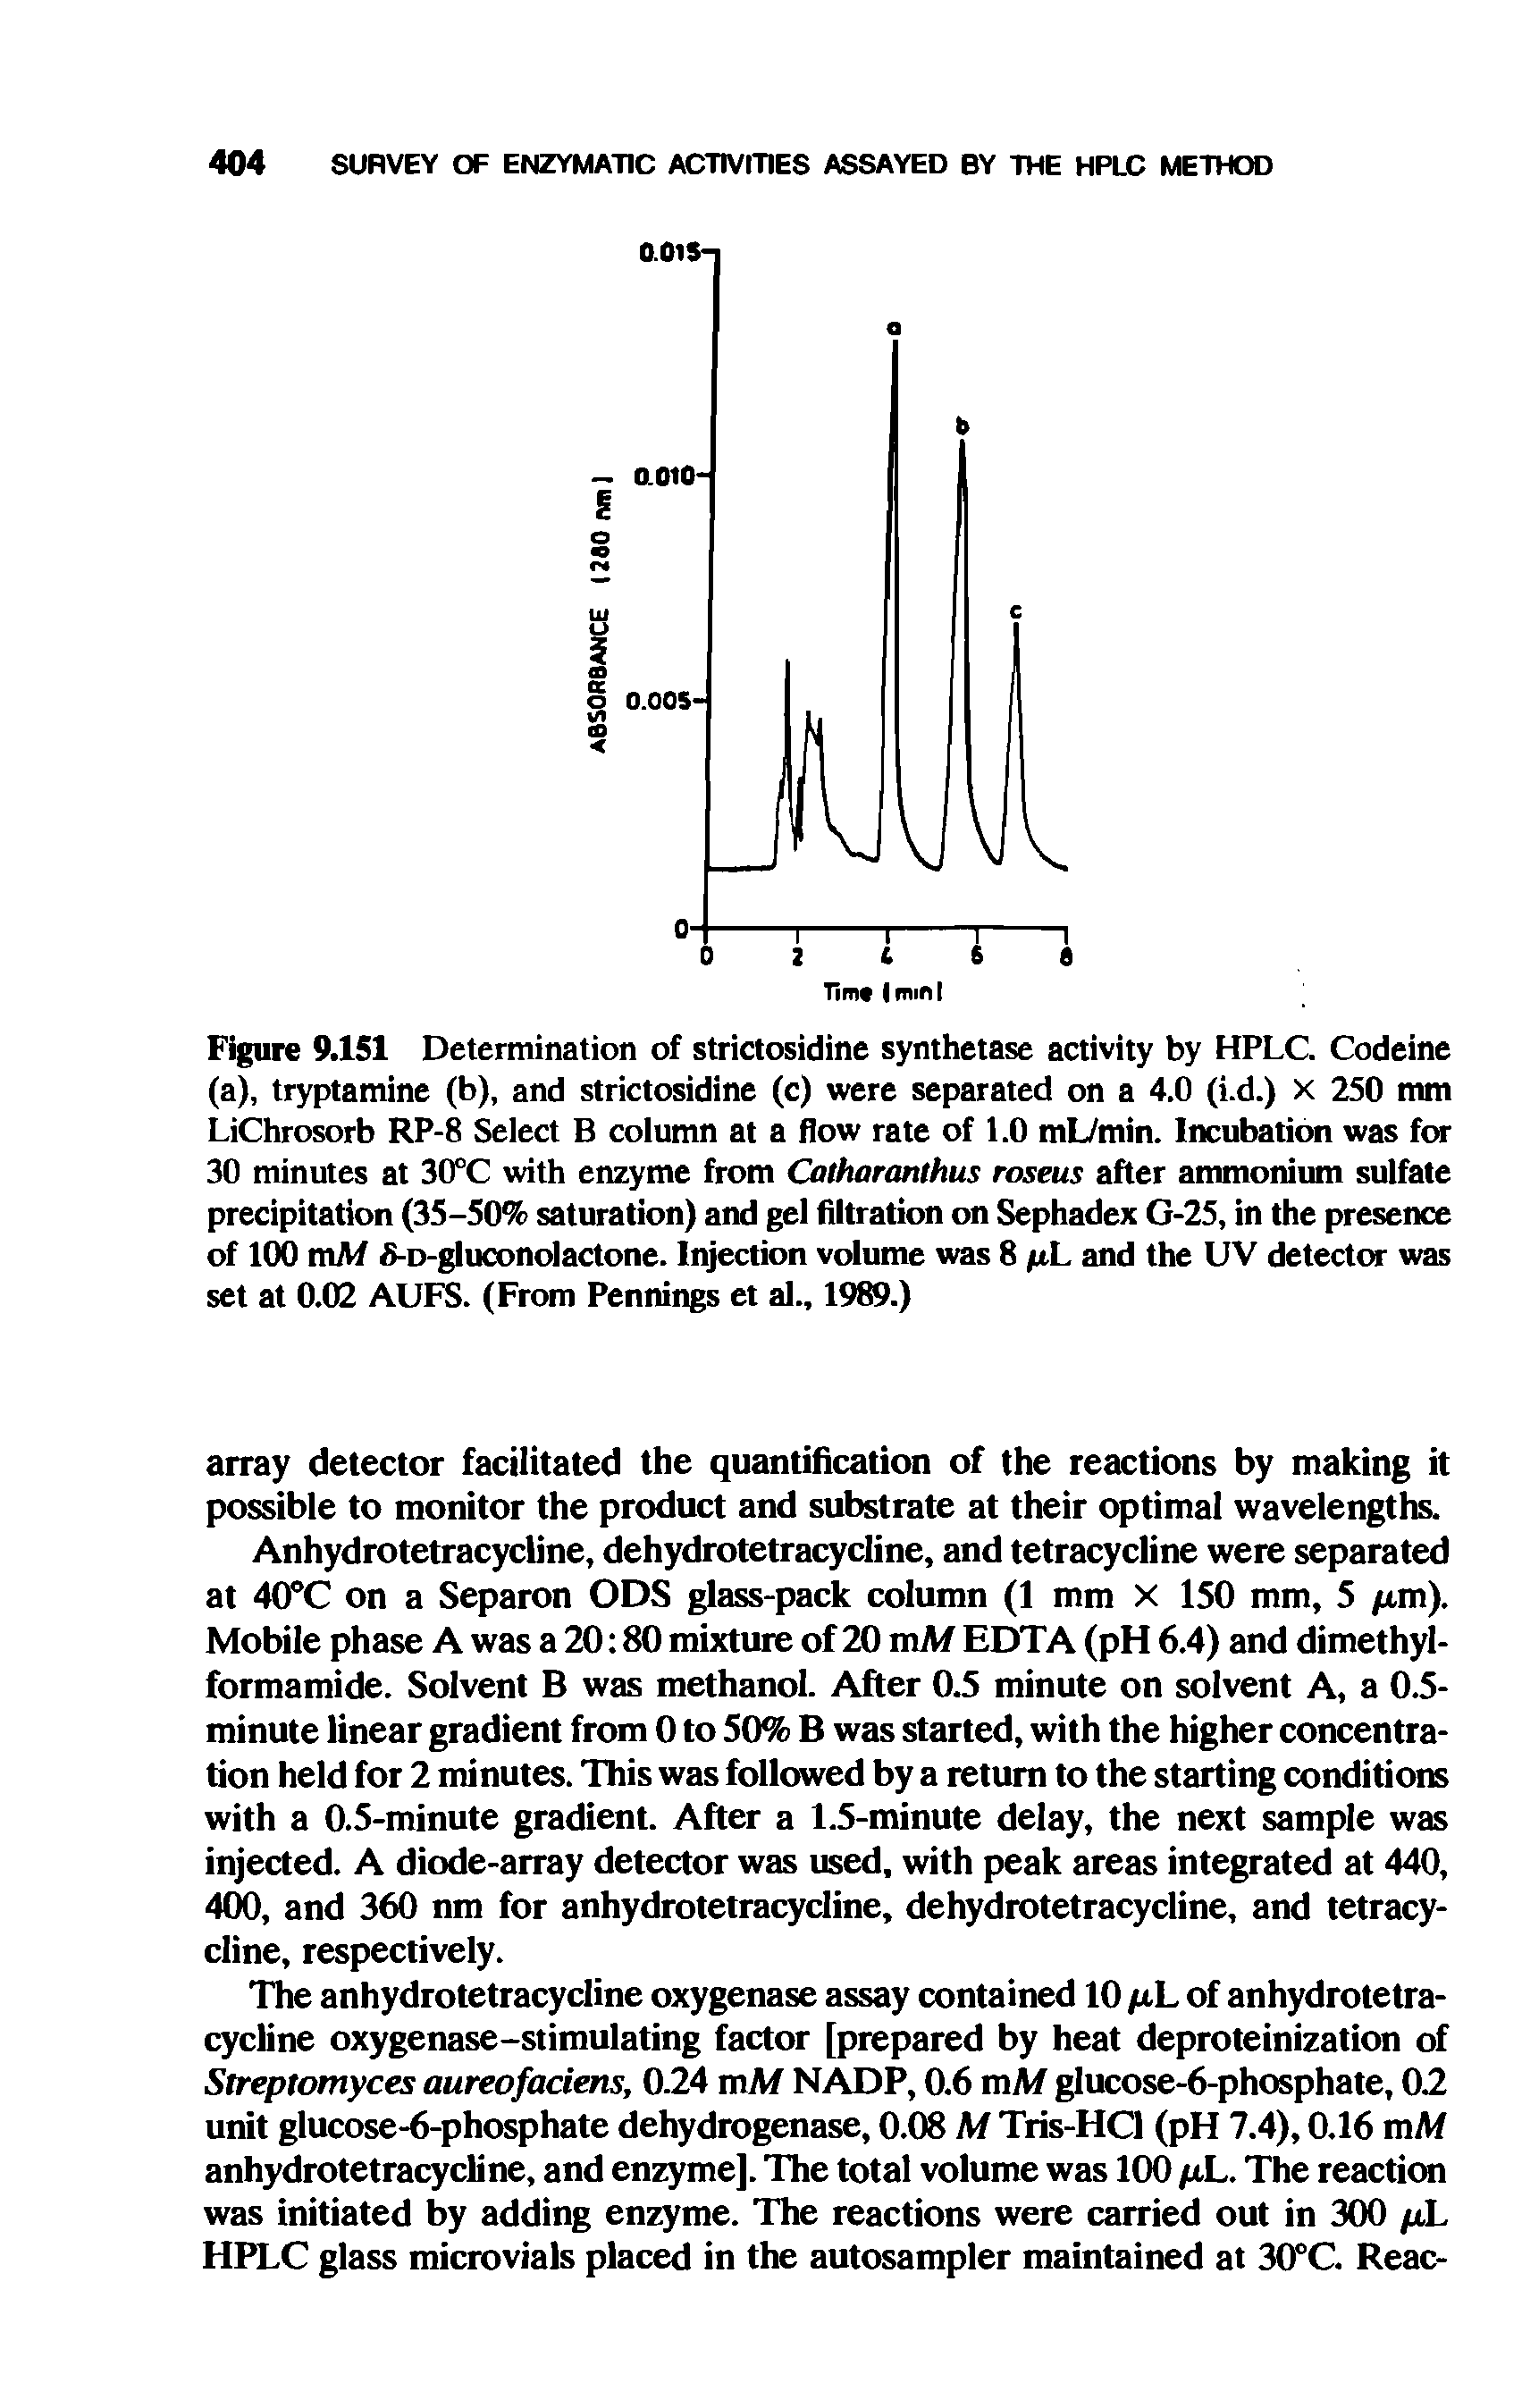 Figure 9.151 Determination of strictosidine synthetase activity by HPLC. Codeine (a), tryptamine (b), and strictosidine (c) were separated on a 4.0 (i.d.) X 250 mm LiChrosorb RP-8 Select B column at a flow rate of 1.0 mL/min. Incubation was for 30 minutes at 30°C with enzyme from Catharanthus roseus after ammonium sulfate precipitation (35-50% saturation) and gel filtration on Sephadex G-25, in the presence of 100 mM fi-D-gluconolactone. Injection volume was 8 pL and the UV detector was set at 0.02 AUFS. (From Pennings et al., 1989.)...